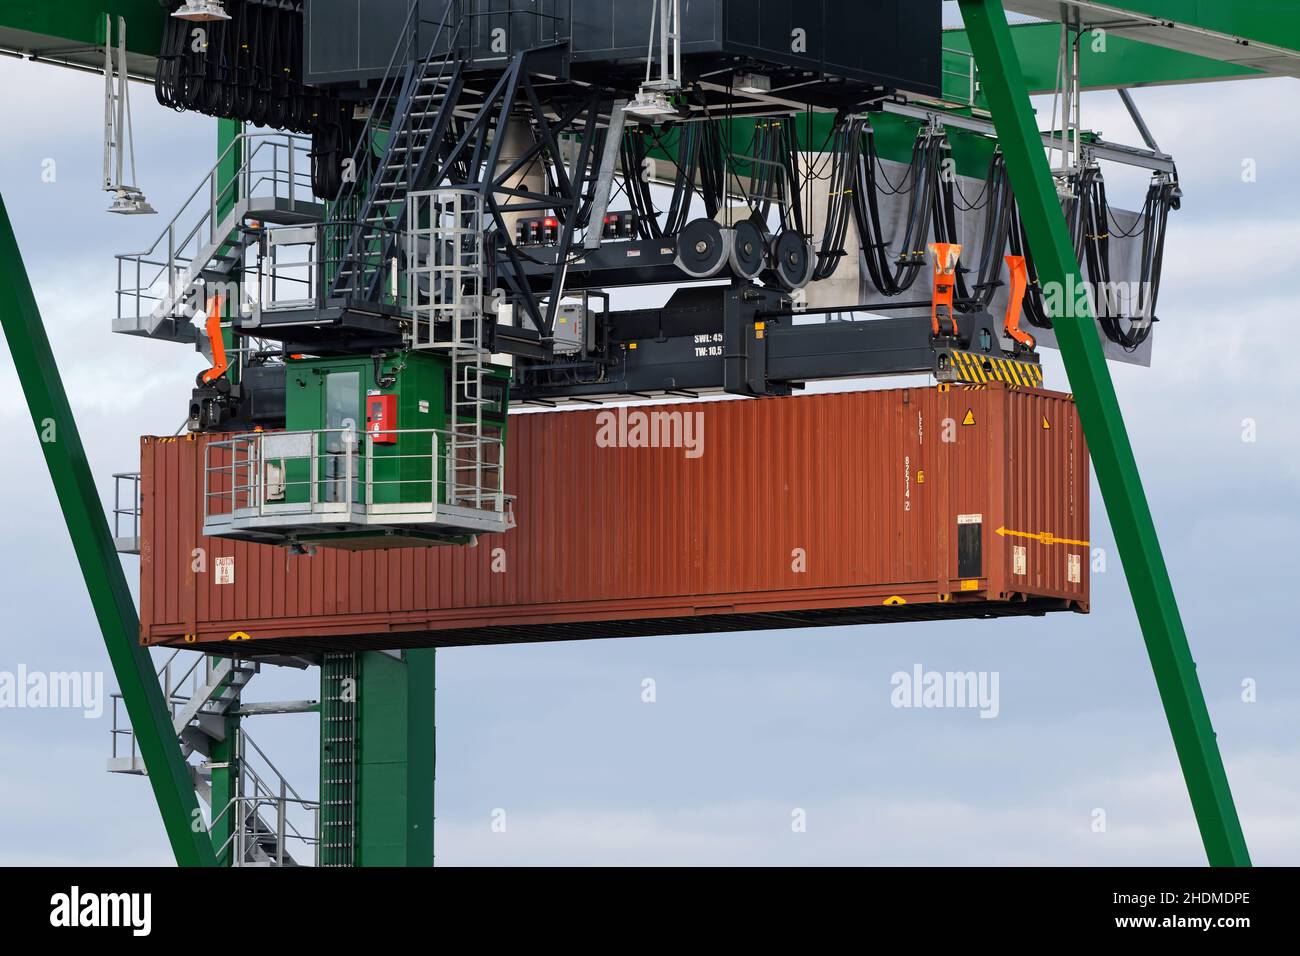 cargo container, loading, container terminal, gantry cranes, container handling, cargo containers, container terminals Stock Photo